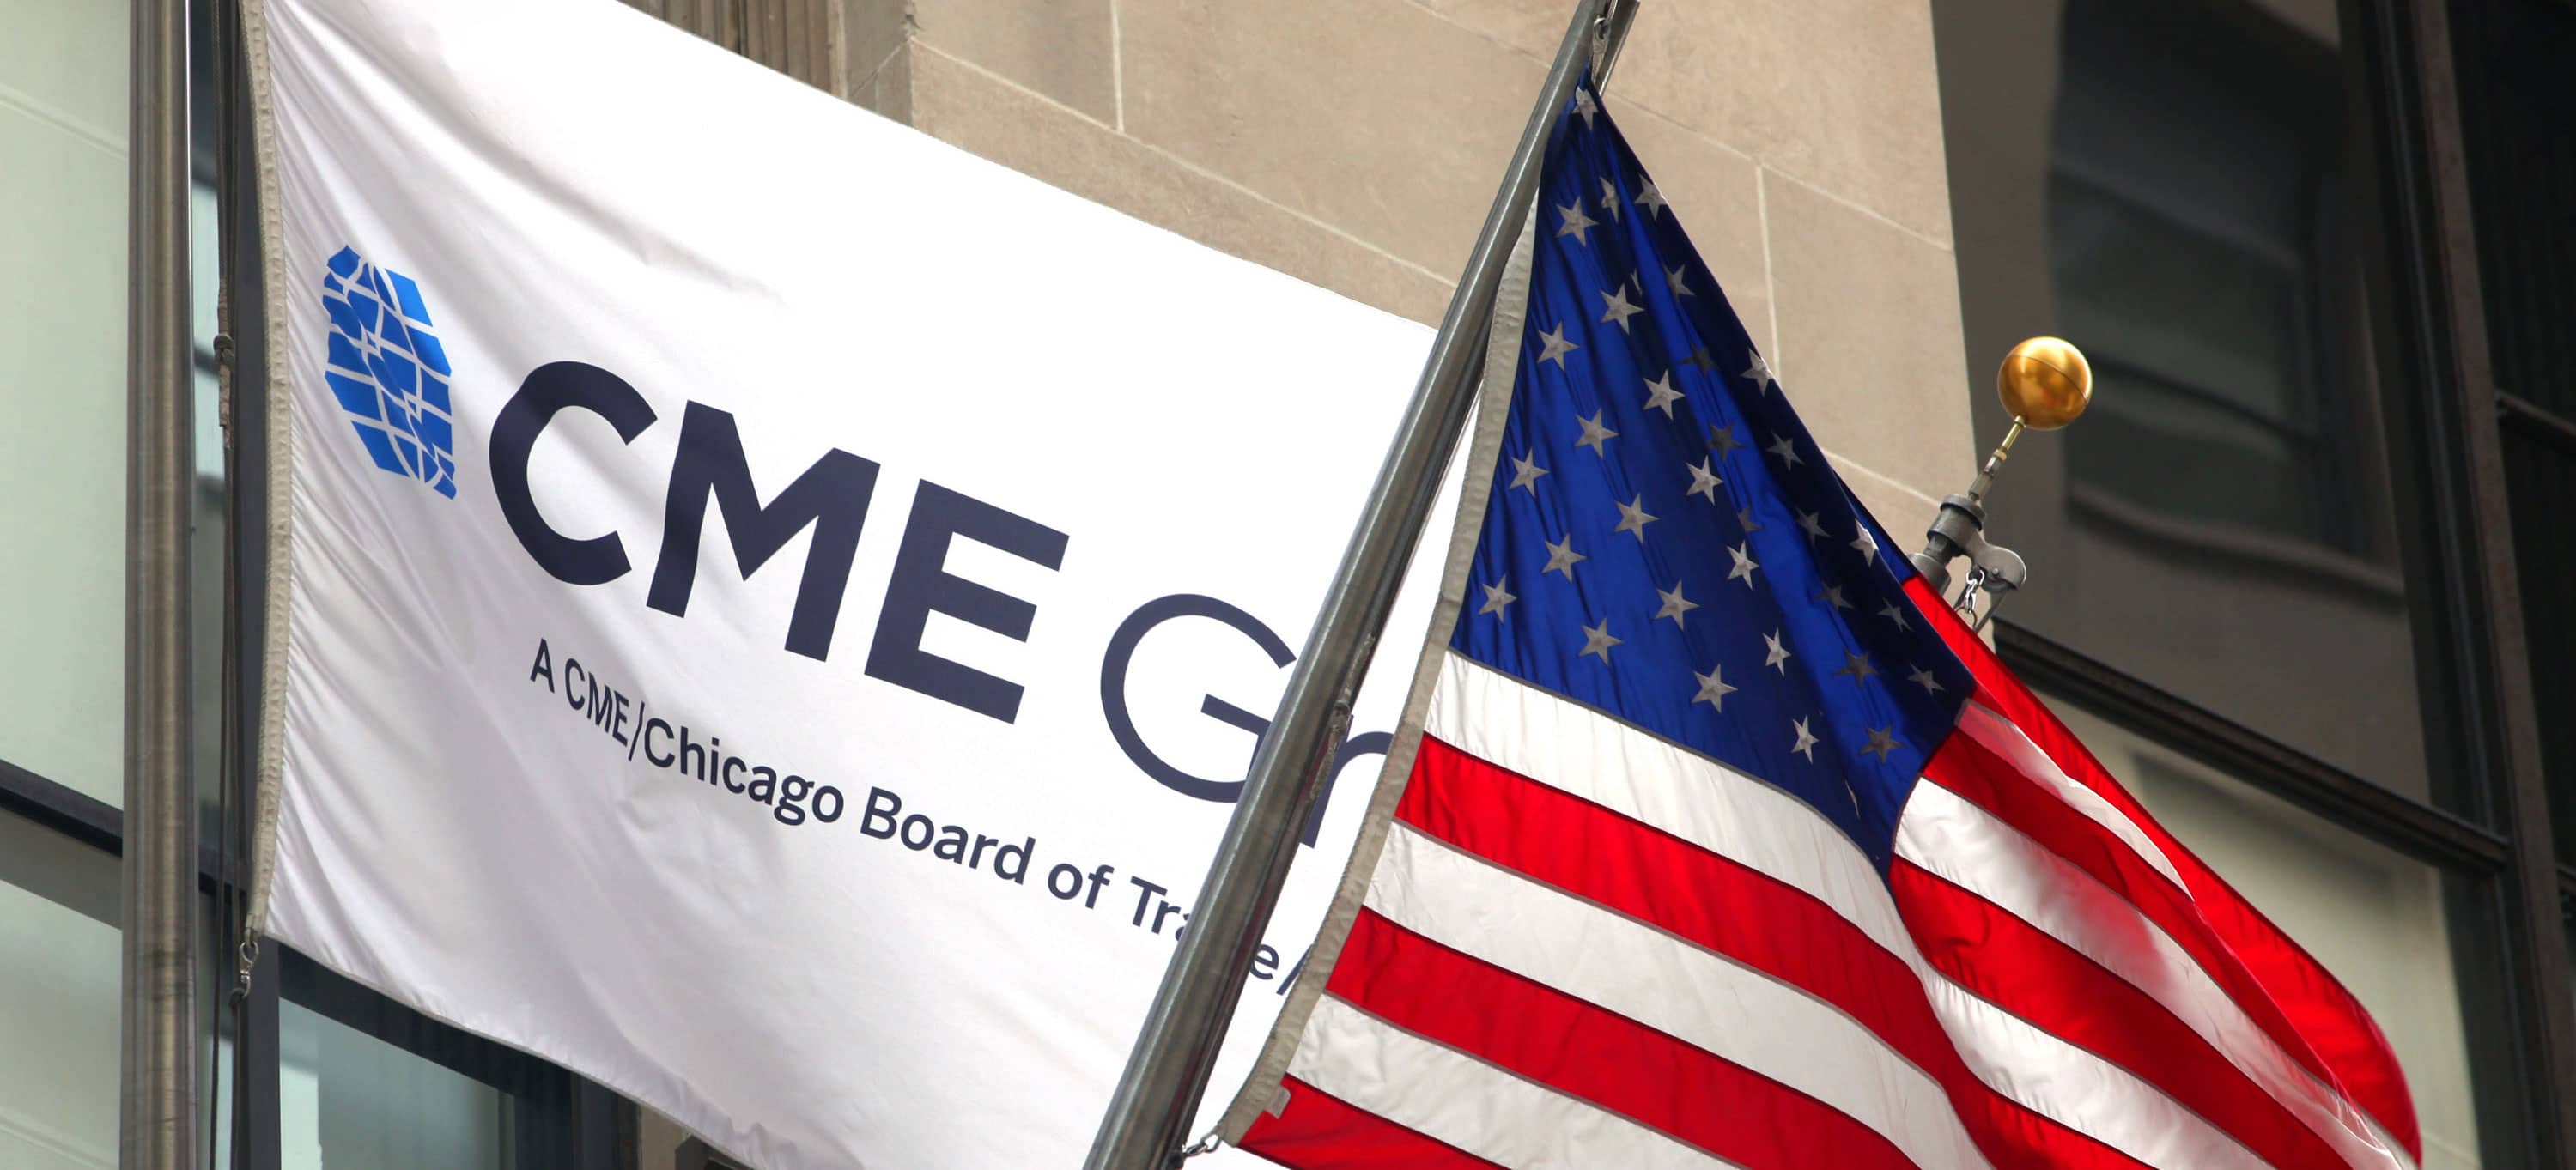 CME Group Hits Record SOFR Futures Volume in October